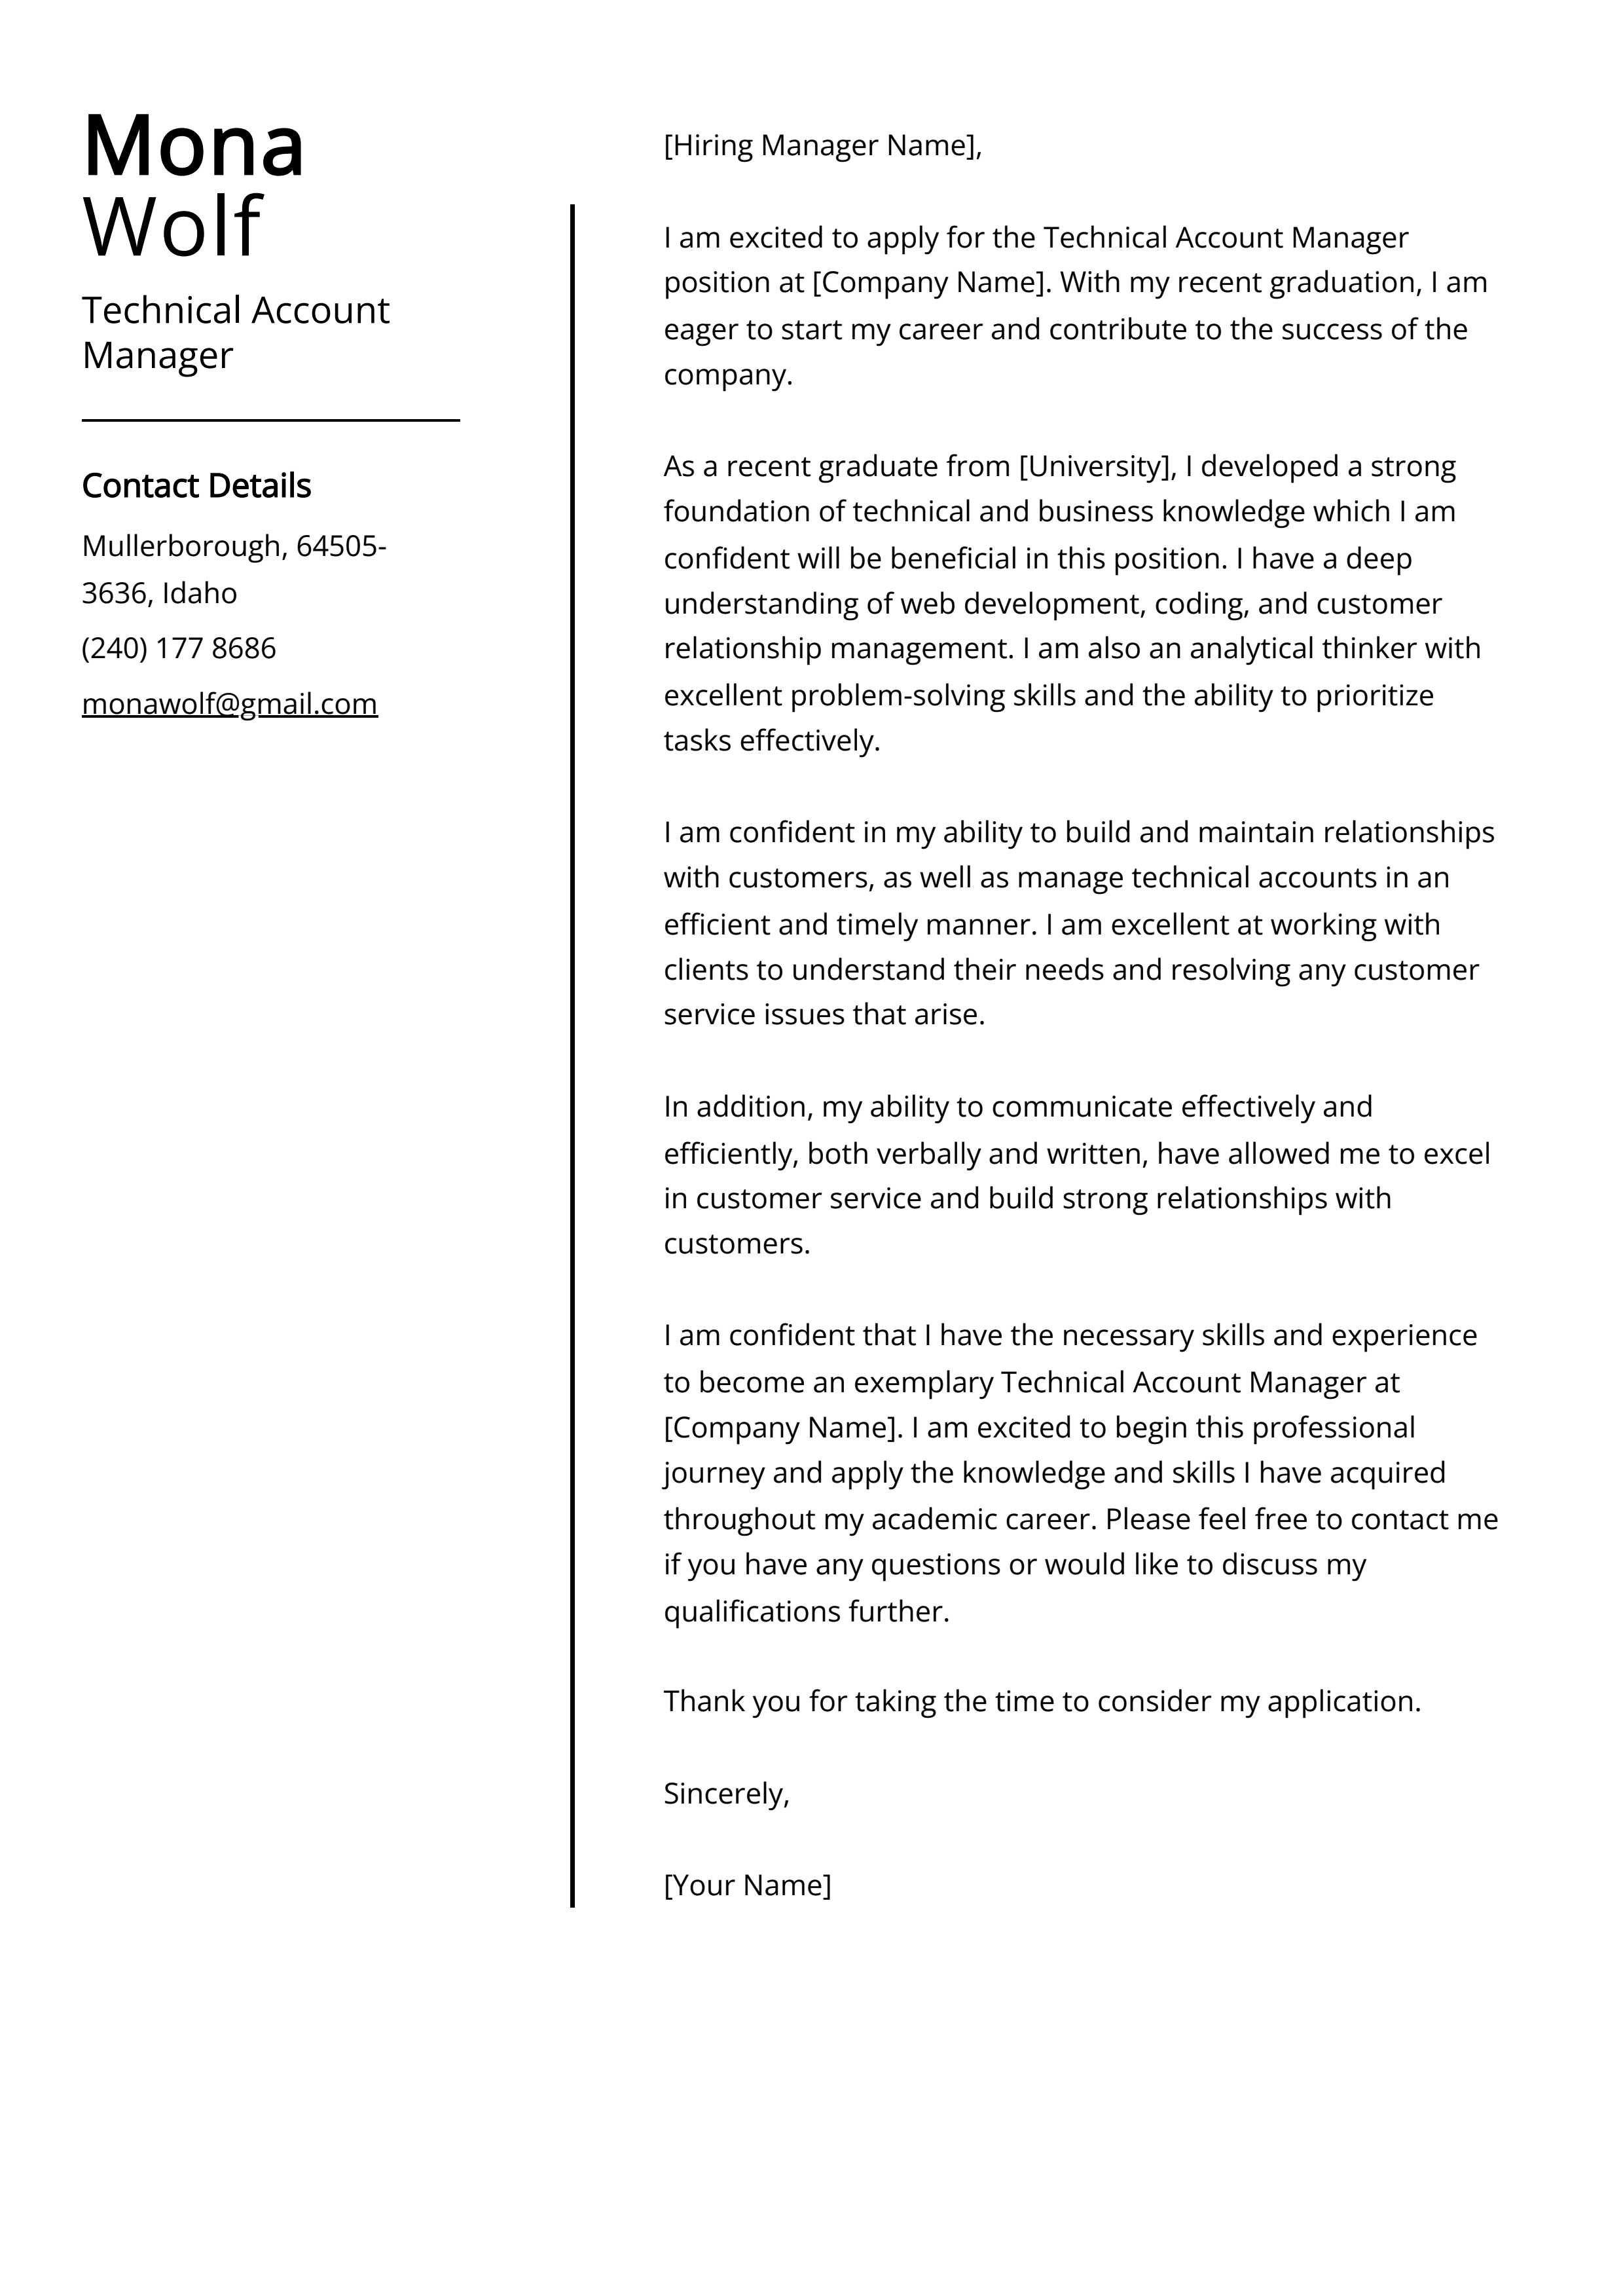 Technical Account Manager Cover Letter Example